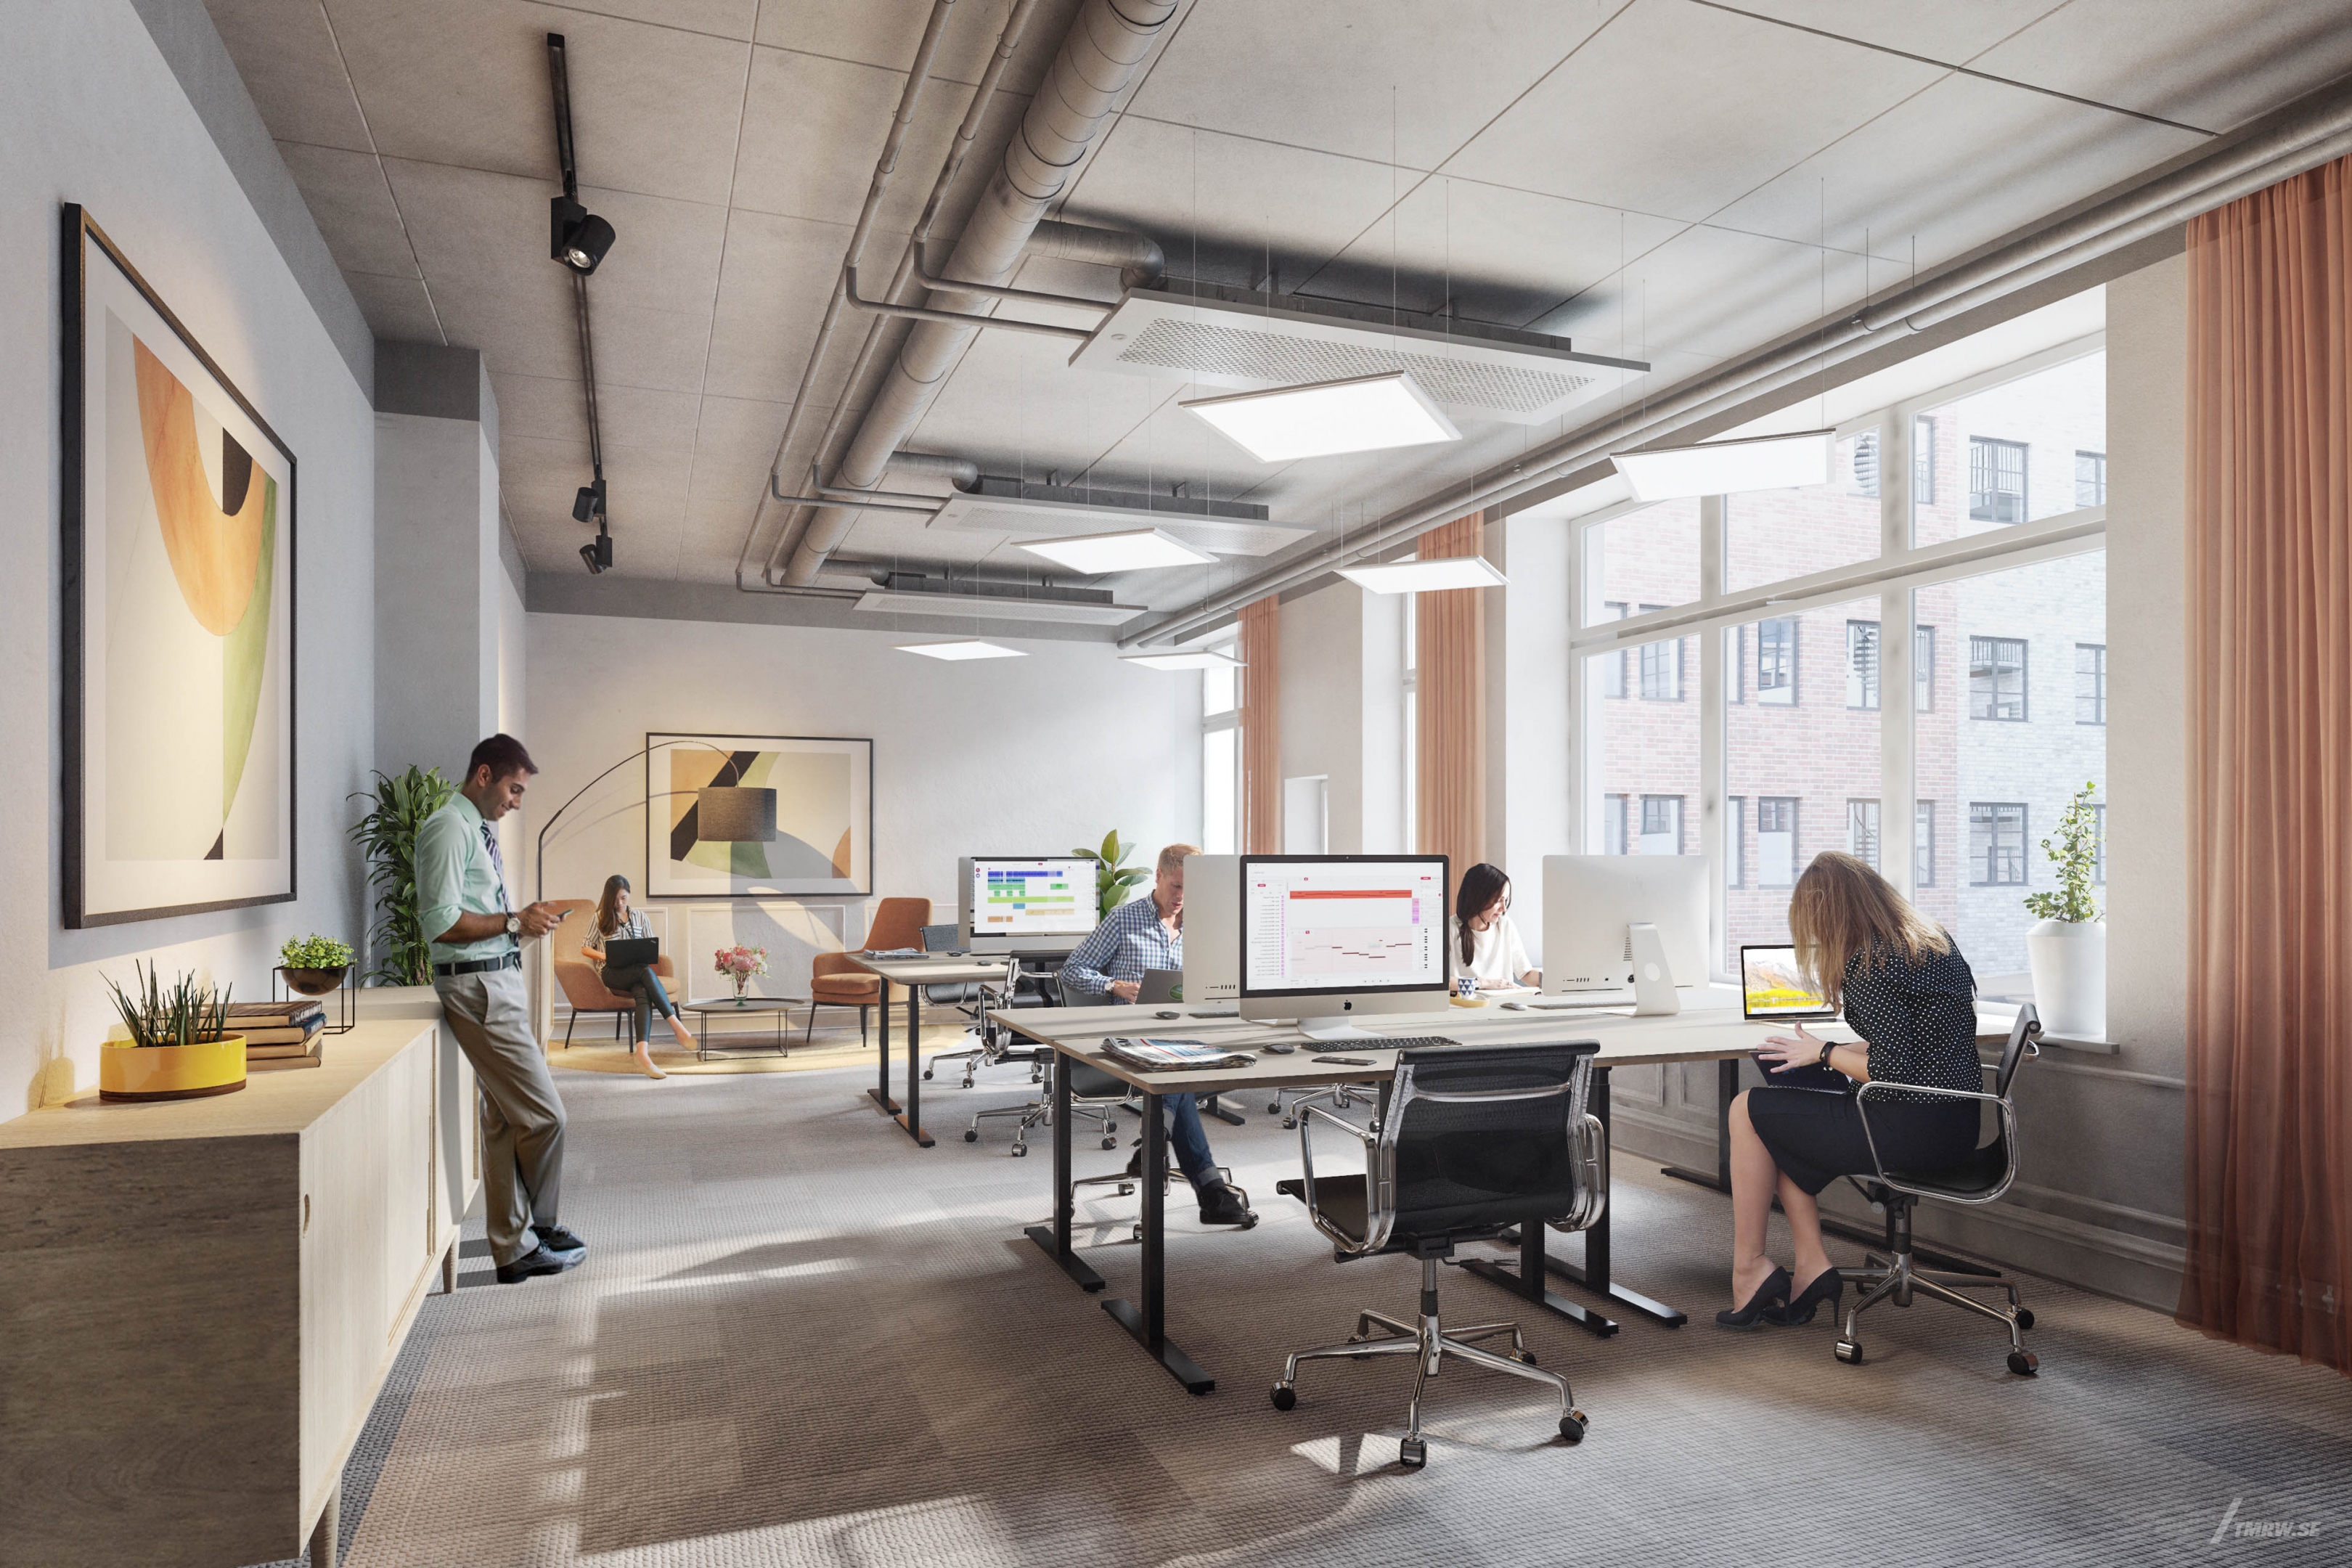 Architectural visualization of Kungsgatan for Fabege a office area, with people sittning and working by a a computior and one person scrolling a mobile phone, in day light form an interior view.